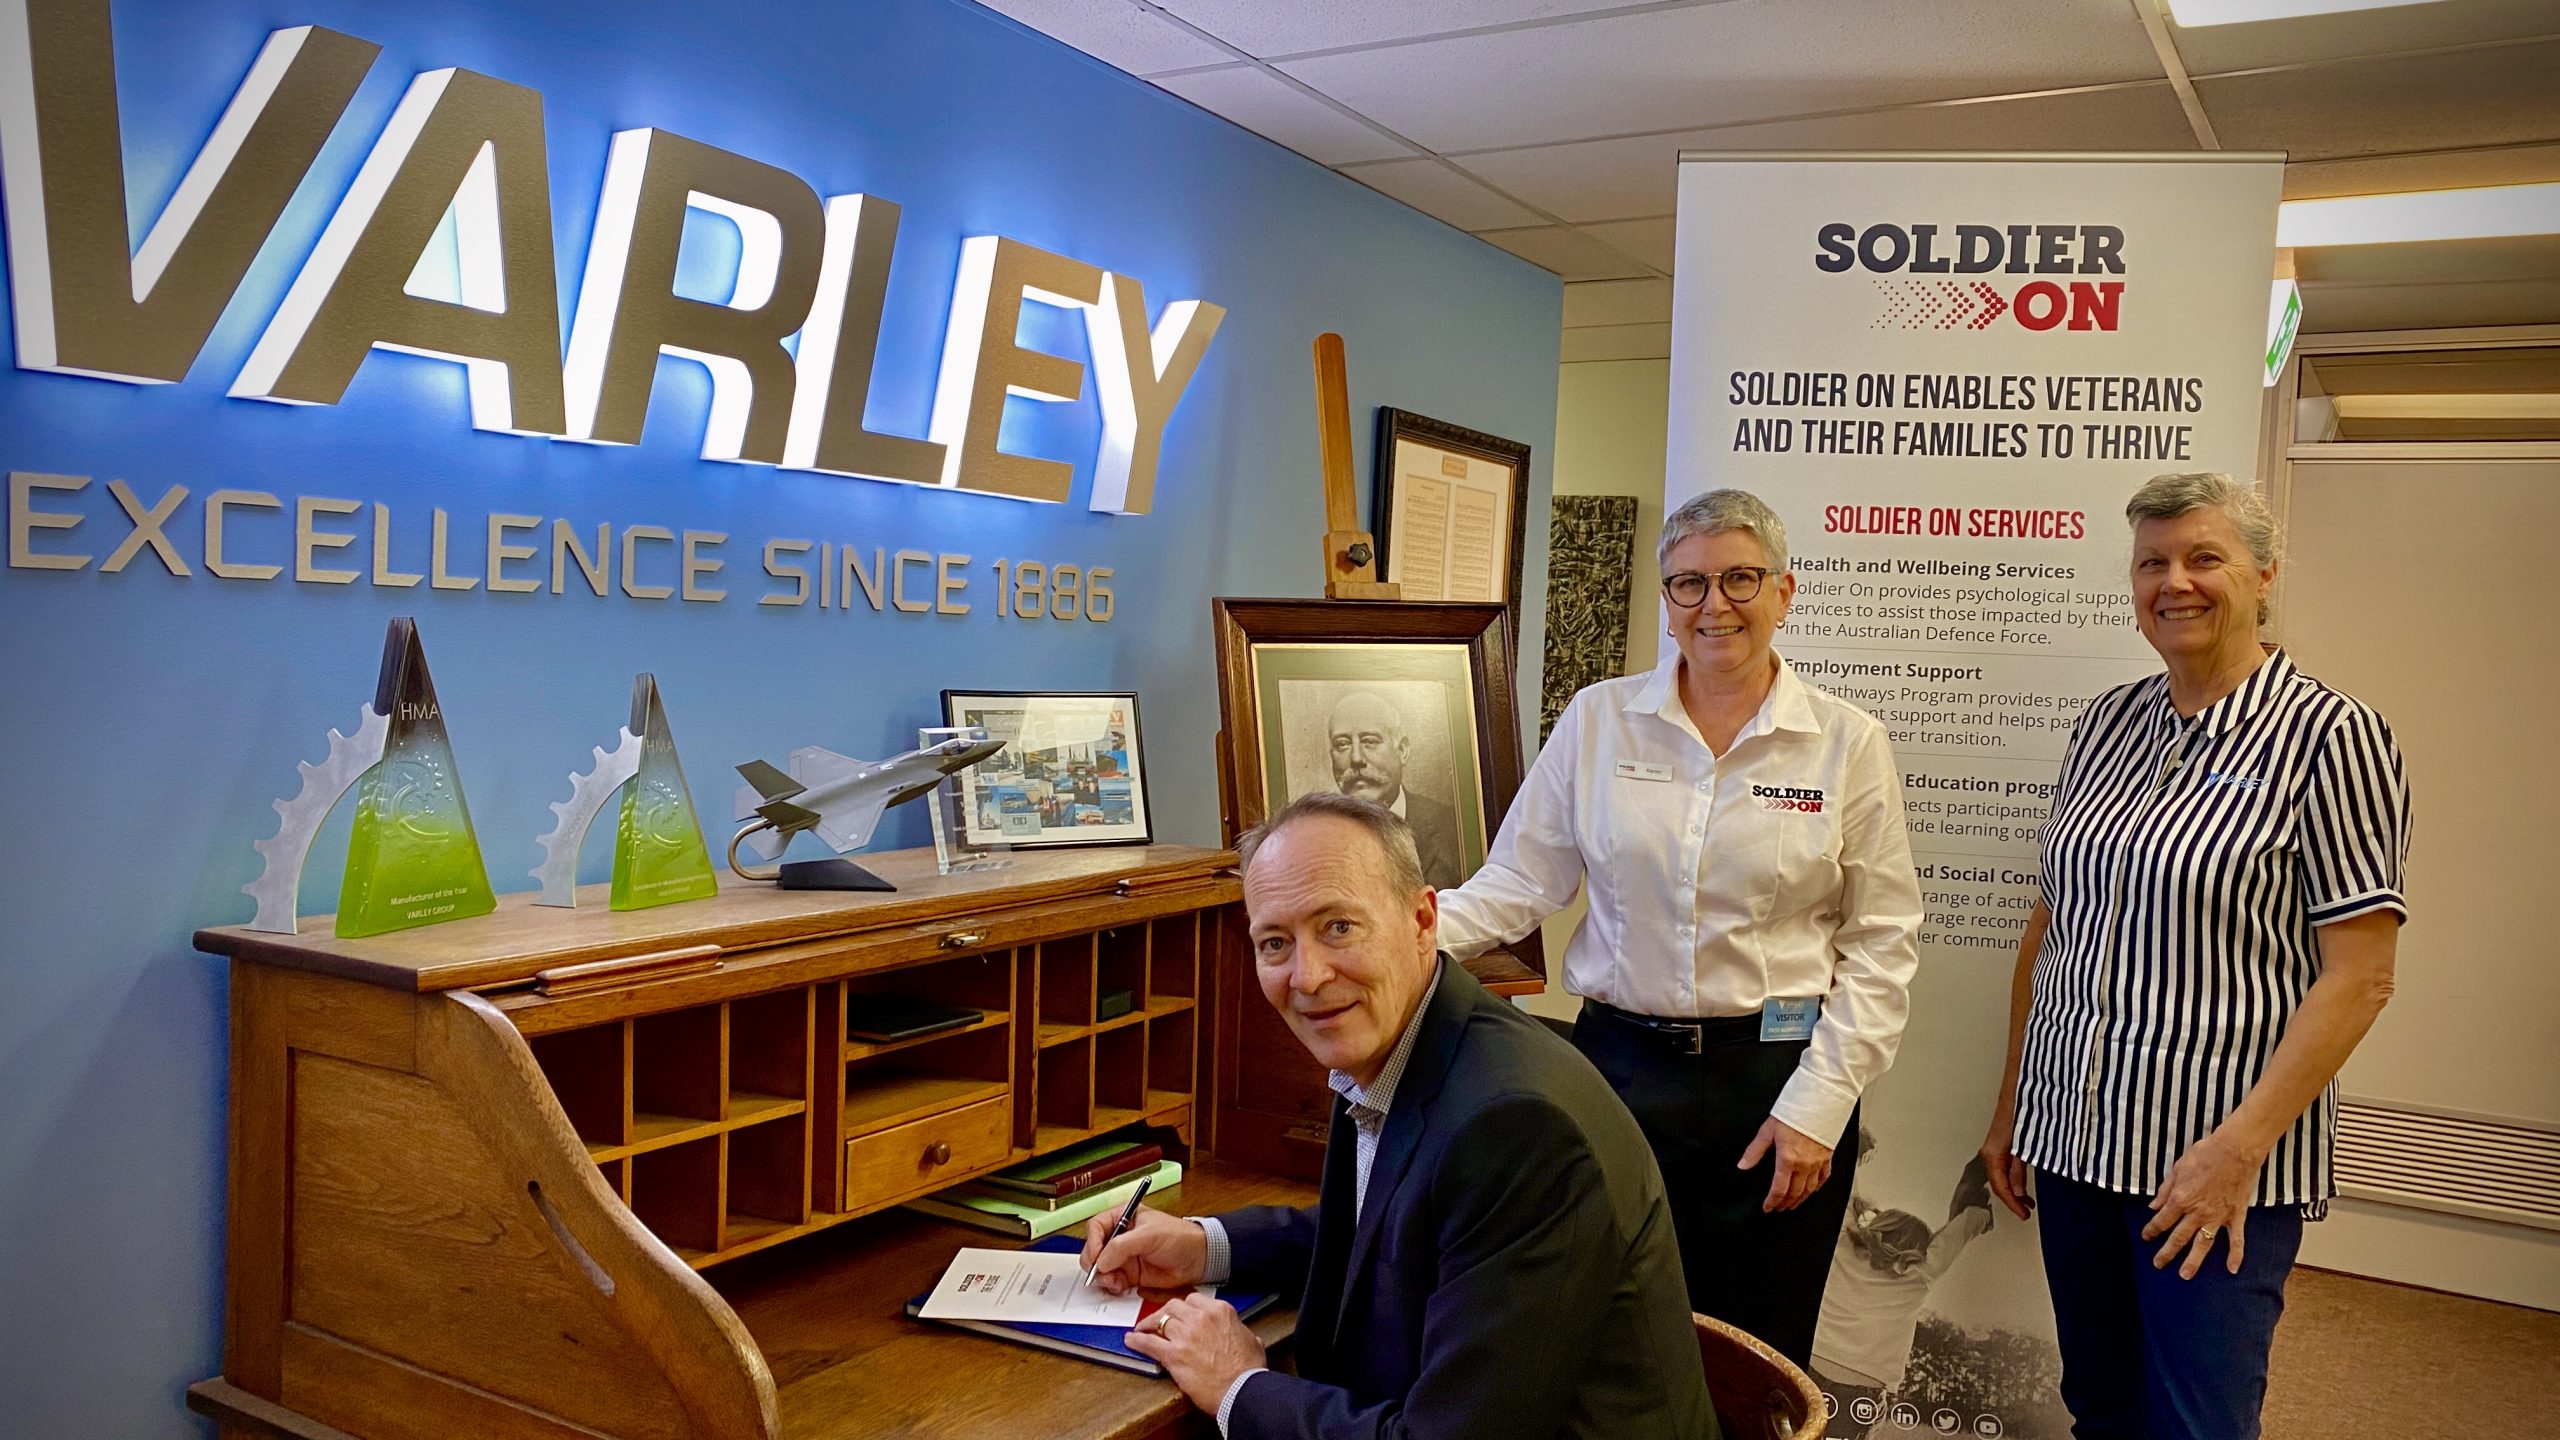 Varley Group Joins Soldier On to Pledge Support of Australian Veterans